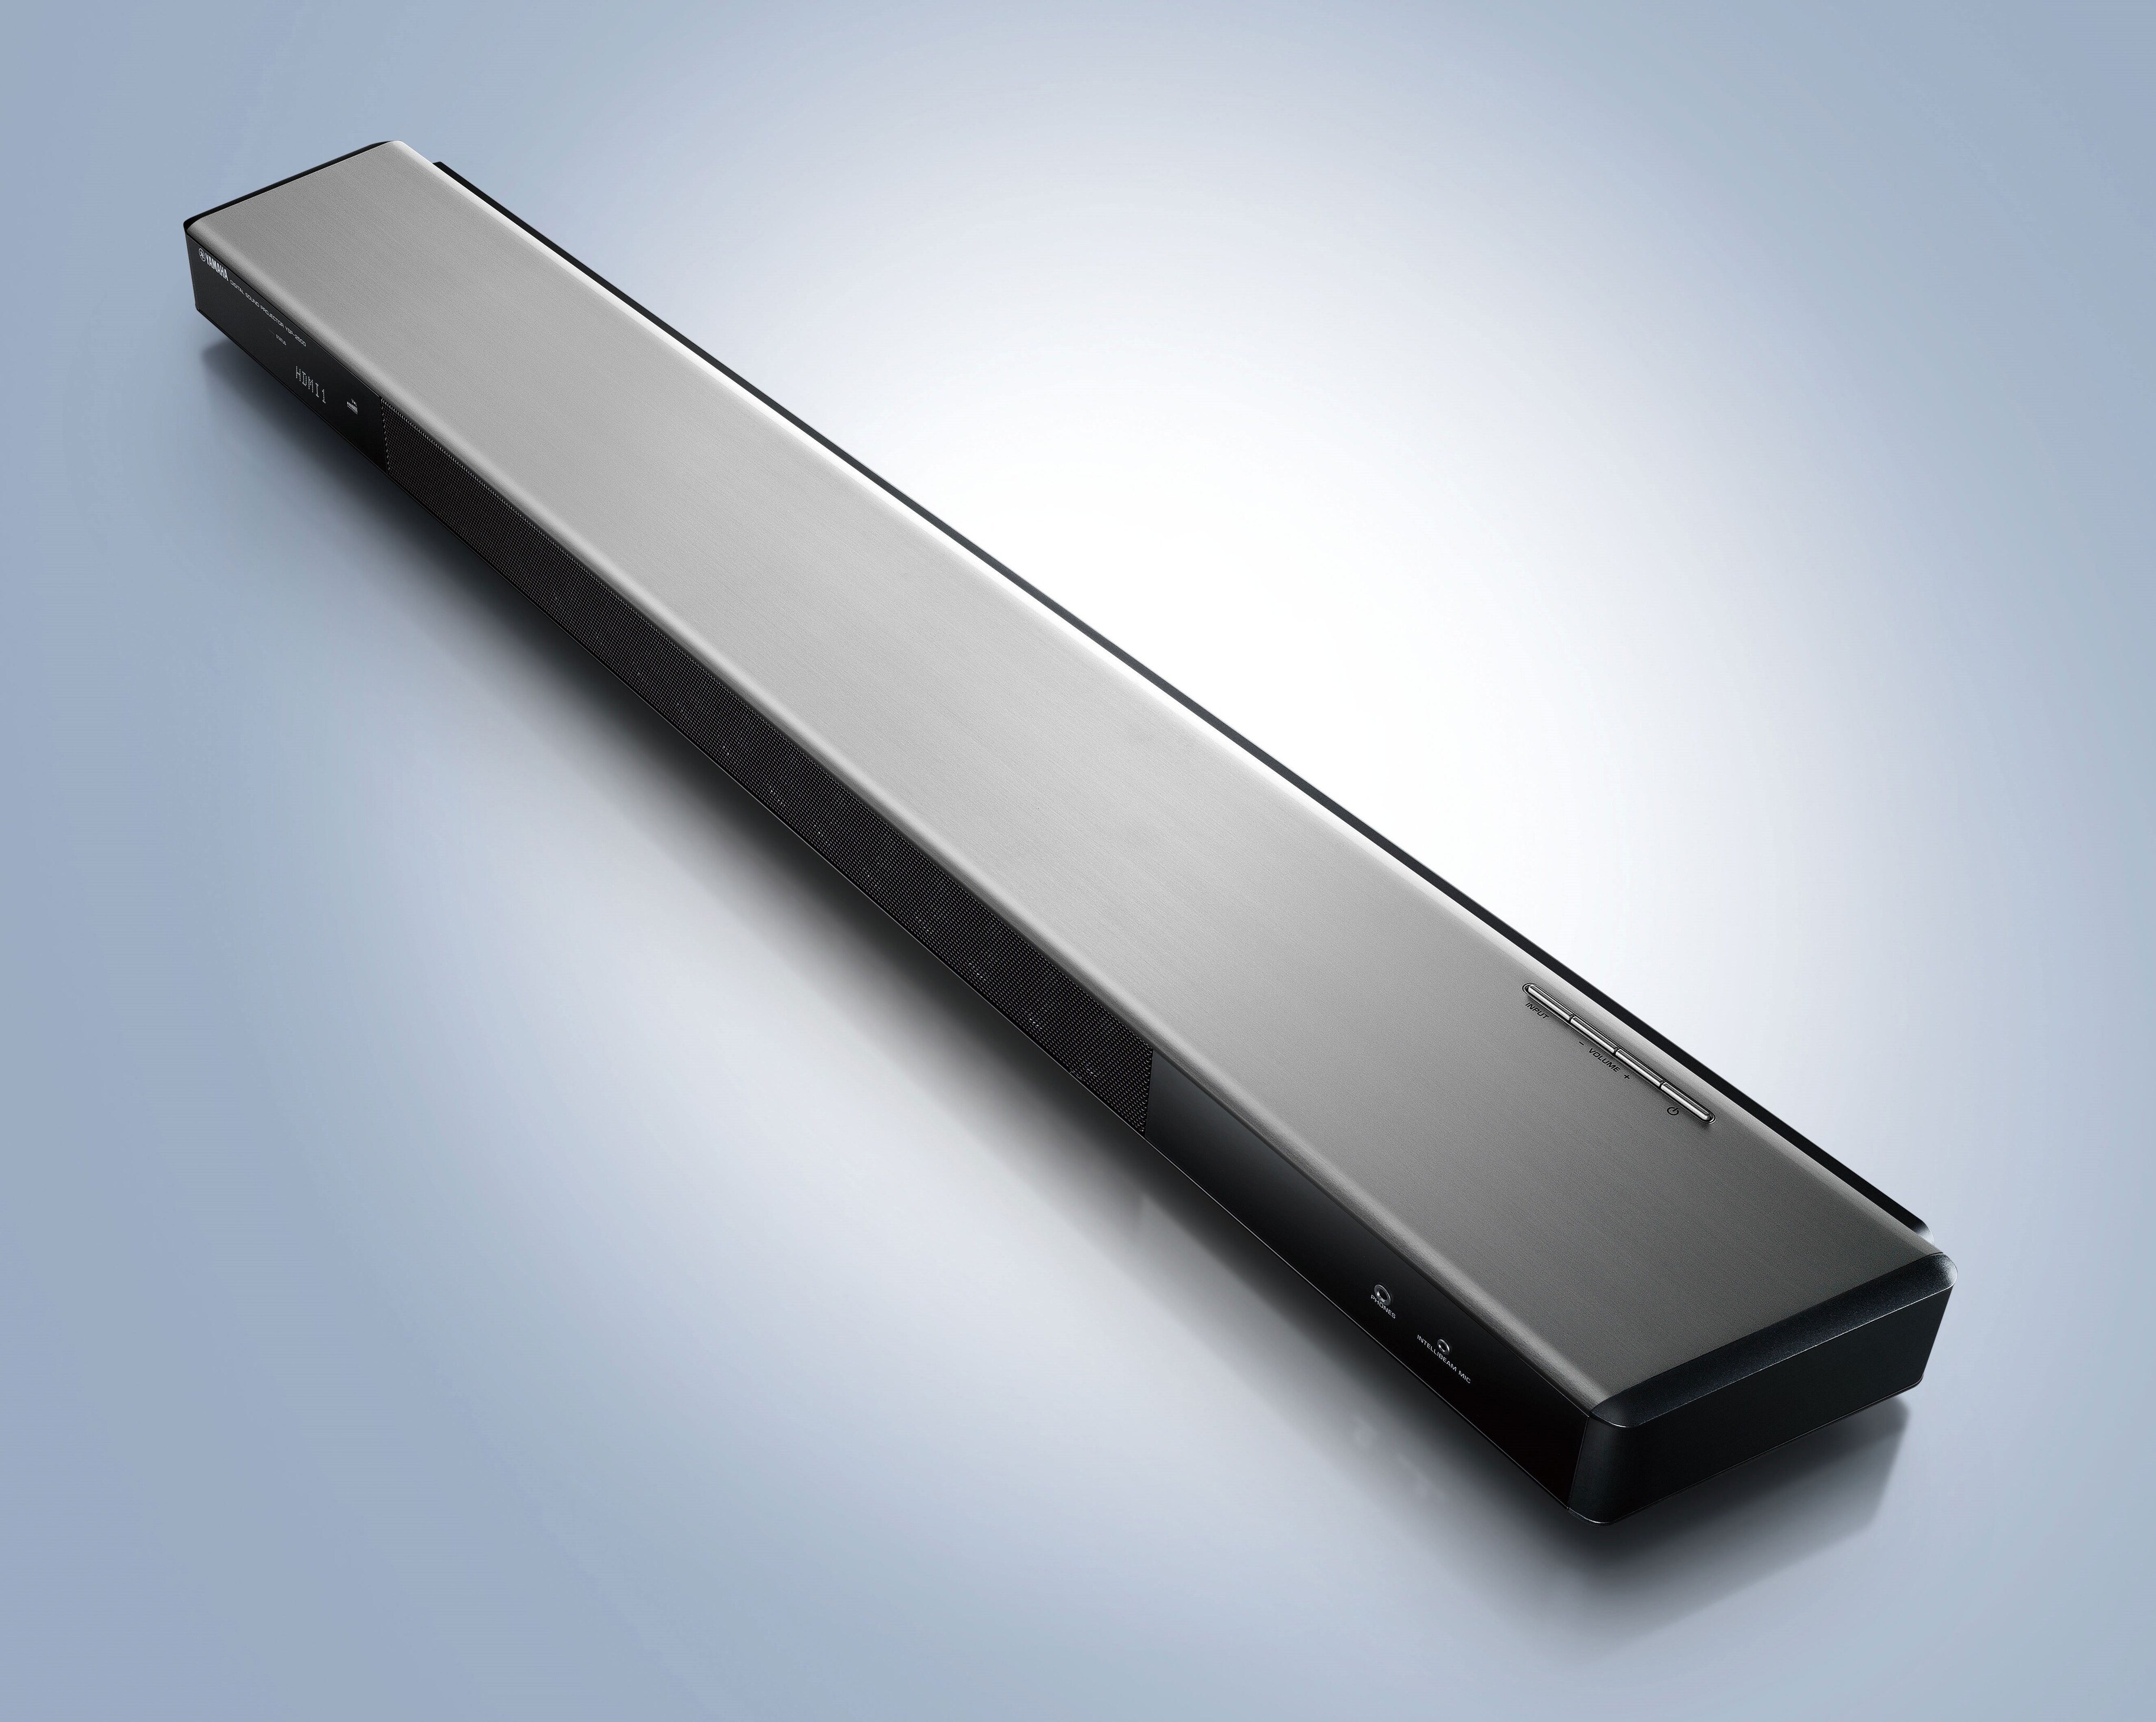 YSP-2500 - Overview - Sound Bar - Audio & Visual - Products